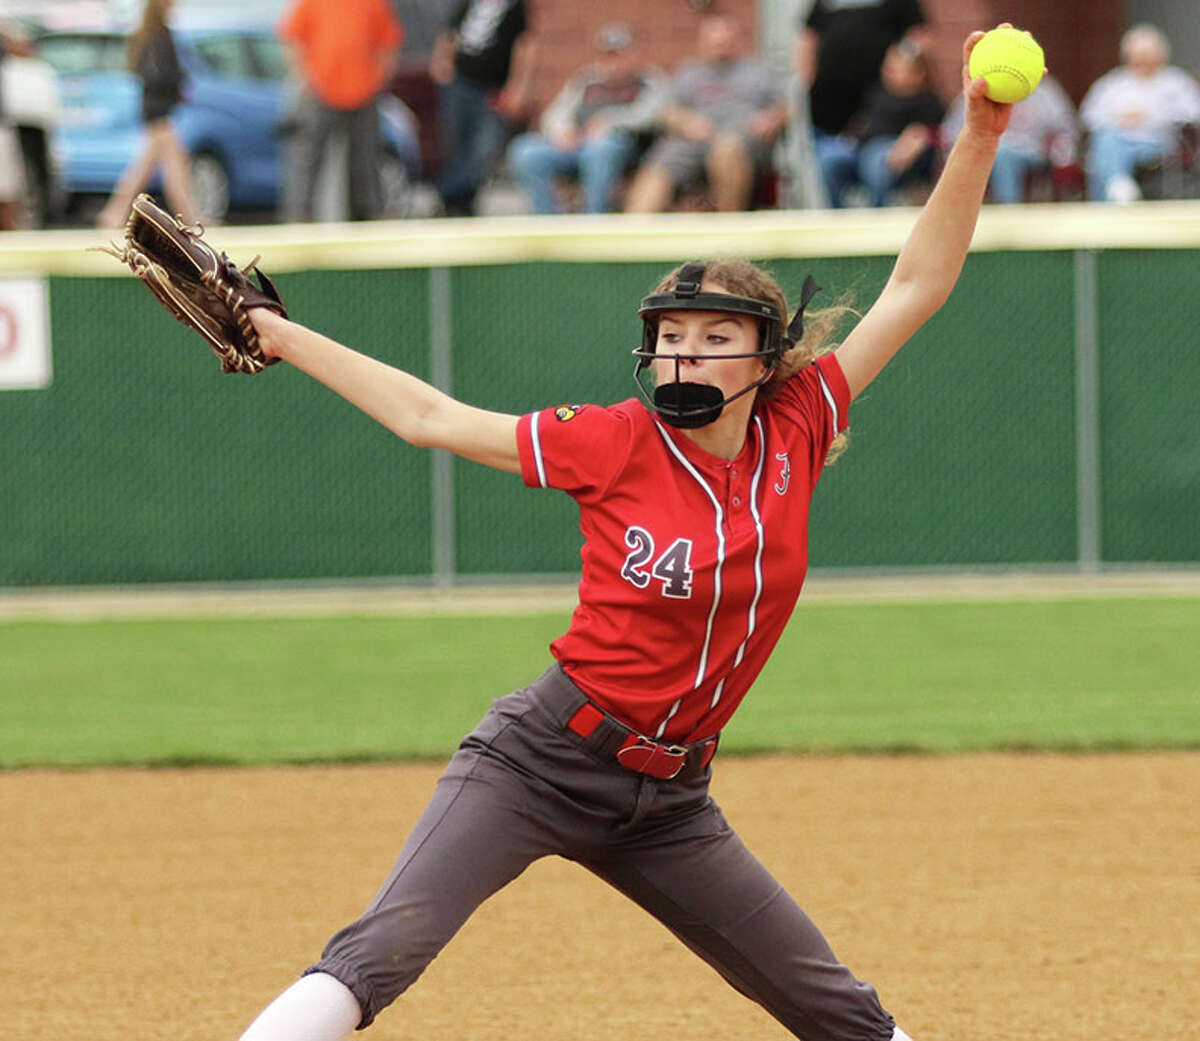 Alton pitcher Grace Presley delivers to the plate in a game last season at Alton High in Godfrey. Presley returns as ace for the Redbirds this season as a junior after striking out 160 batters in 148 innings as a sophomore.